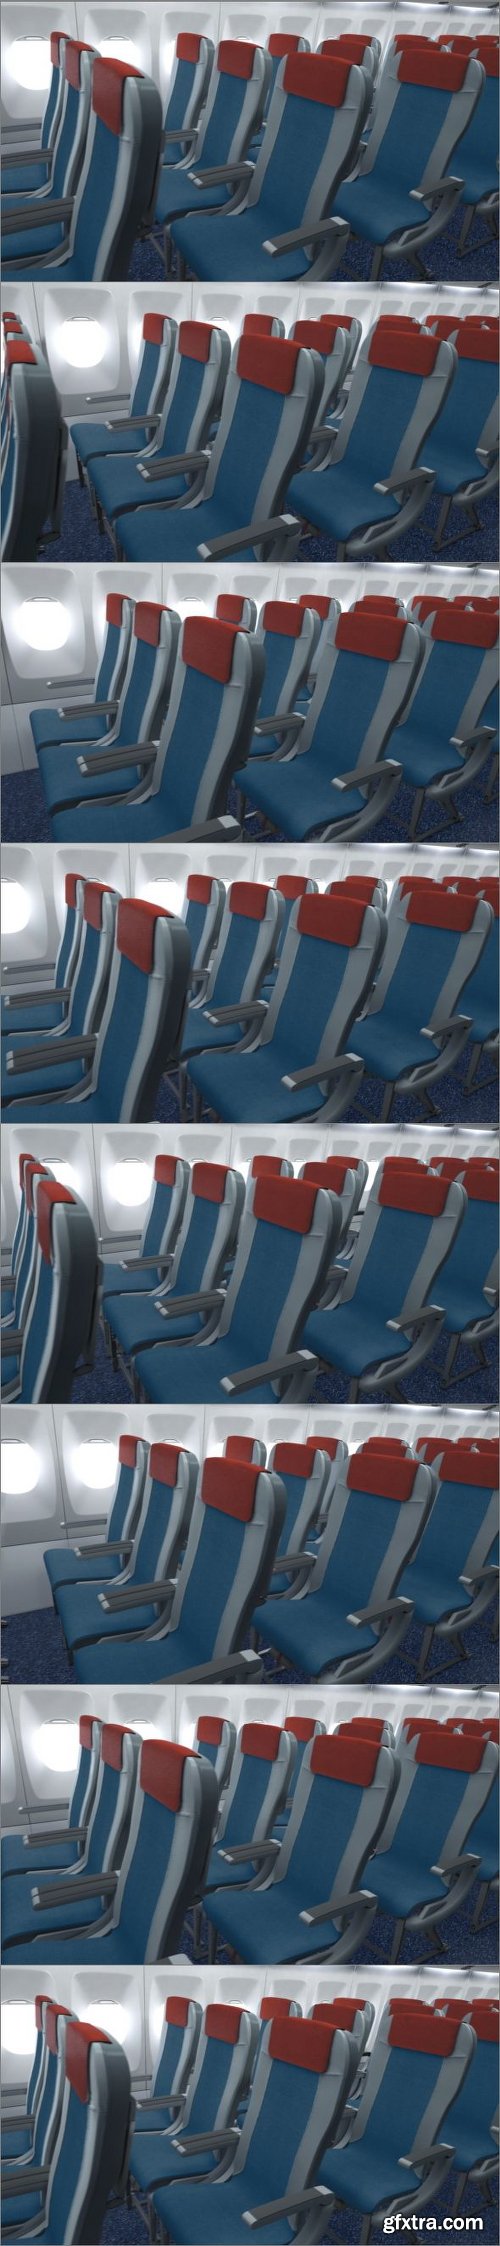 Empty Passenger Seats In Airplane Cabin Seamlessly Looping